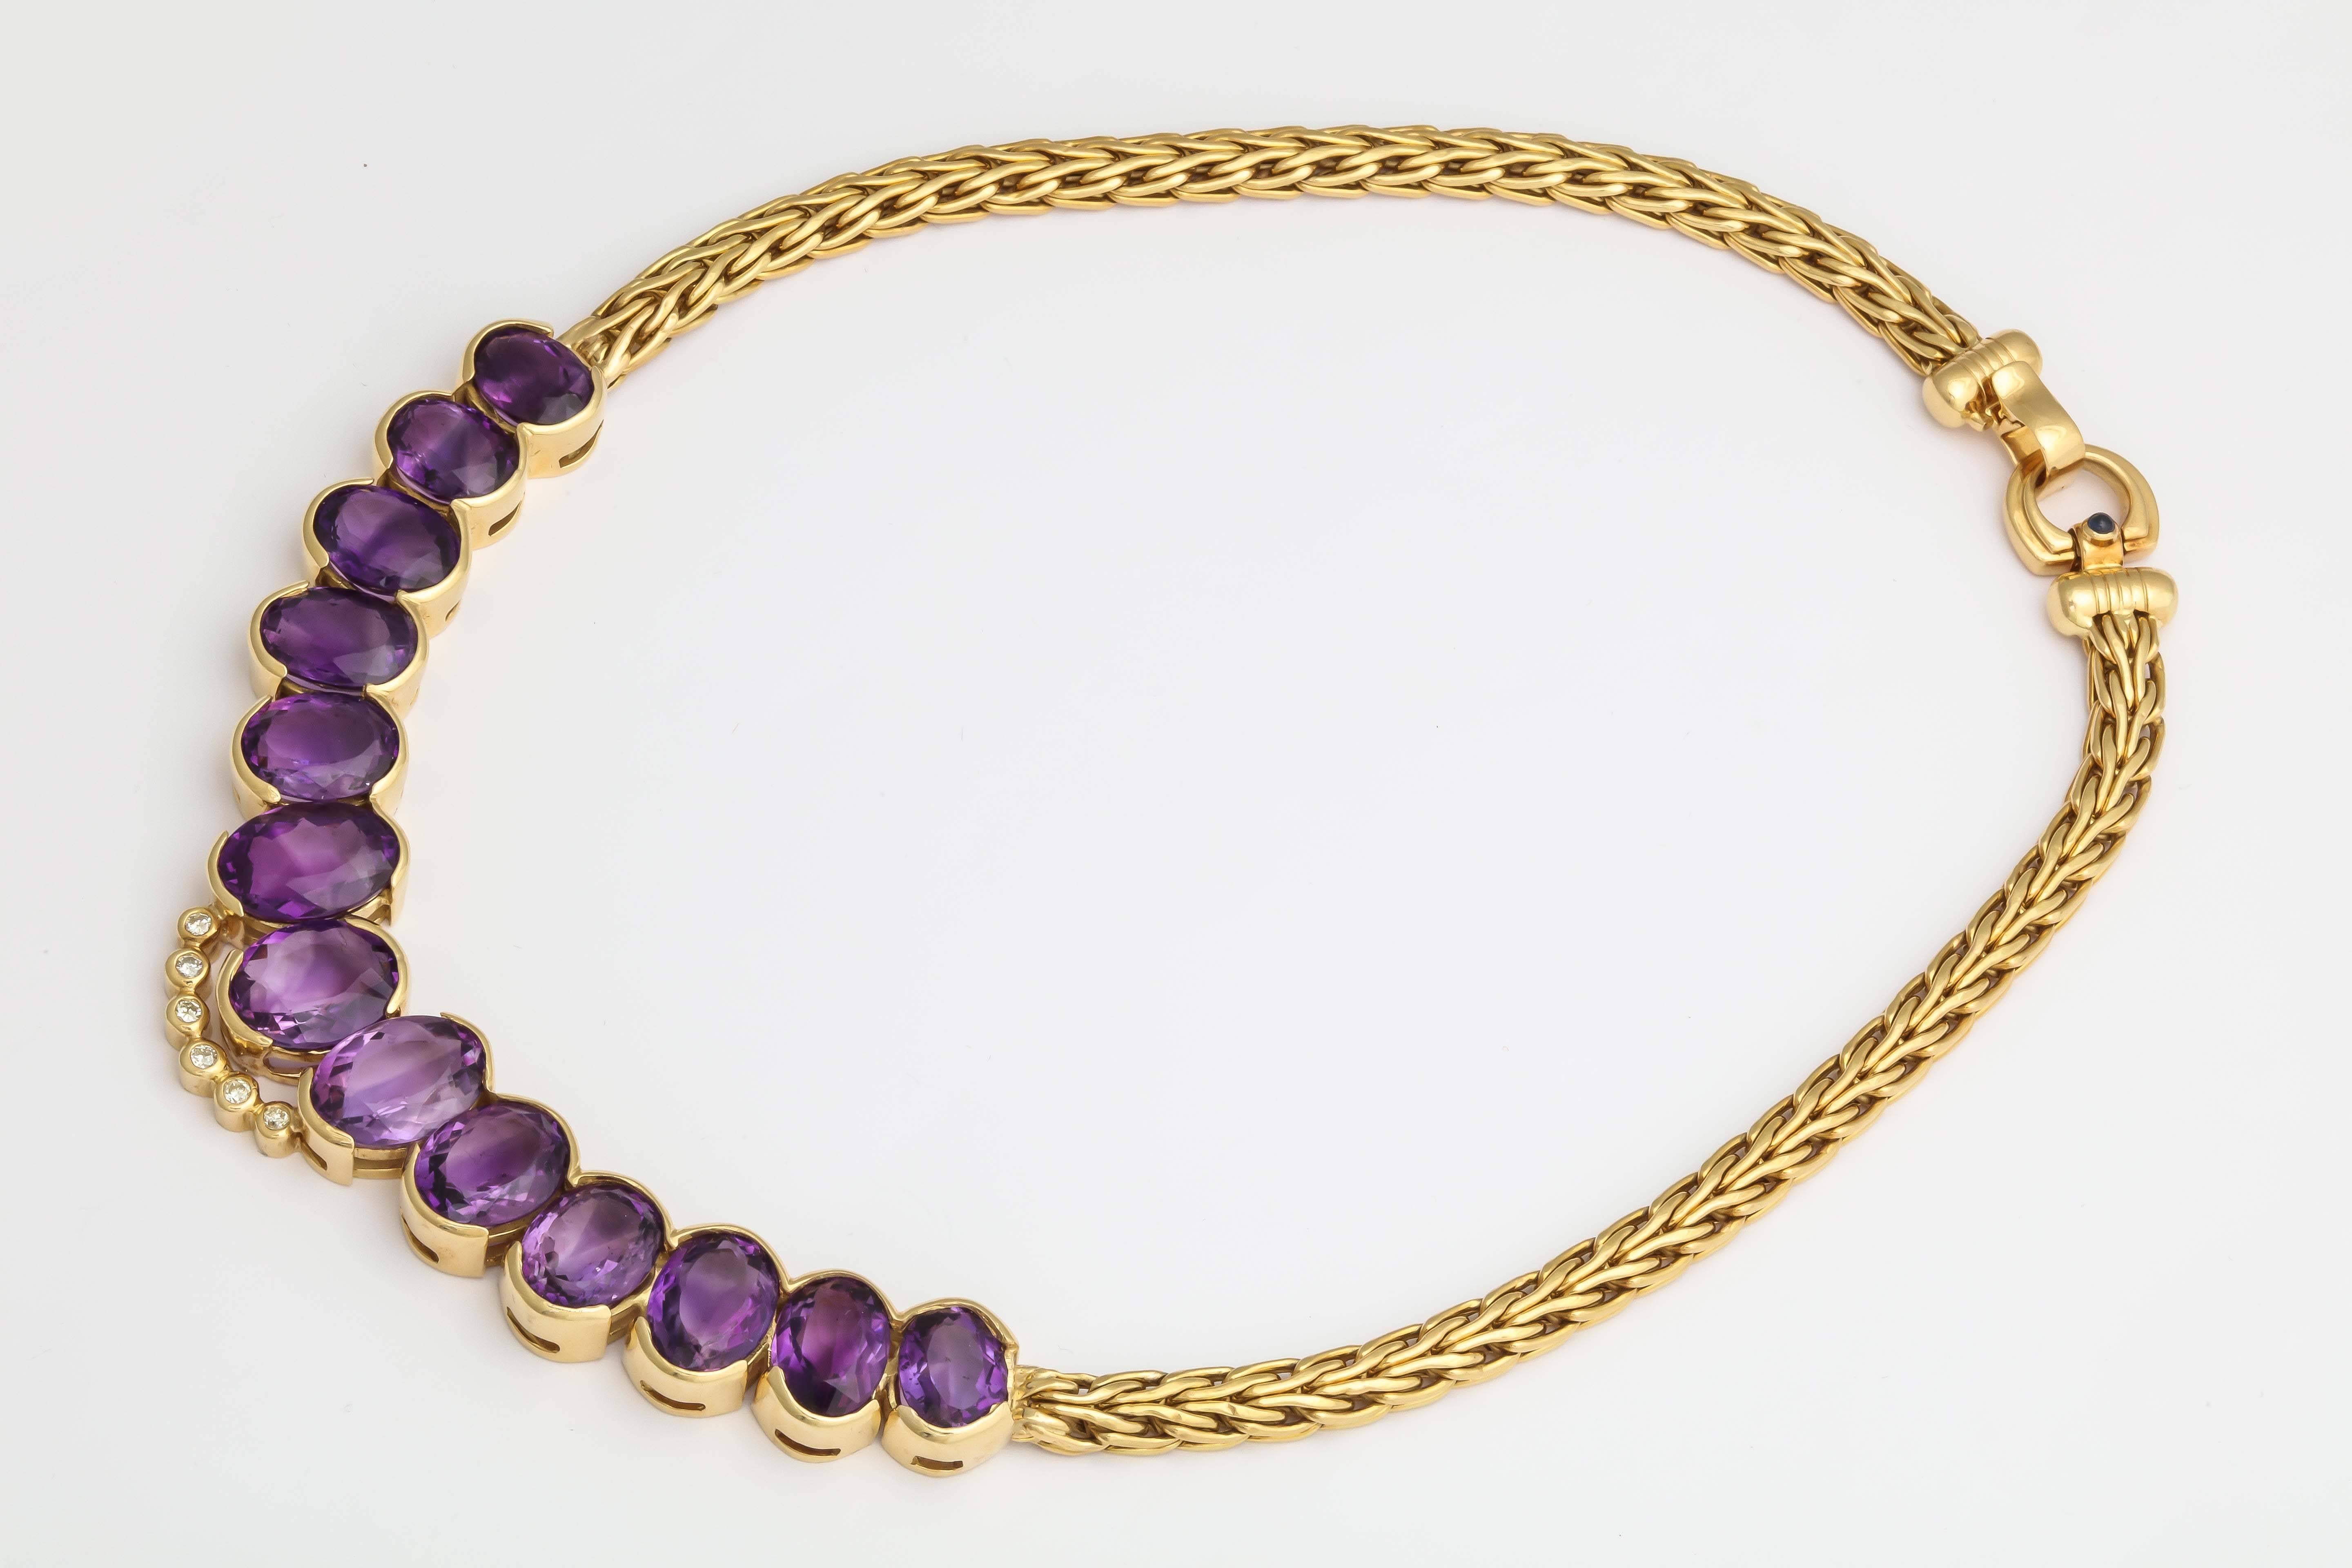 Roberto coin 1980s Amethyst Diamond Gold Collar Necklace With Sapphire Clasp For Sale 2